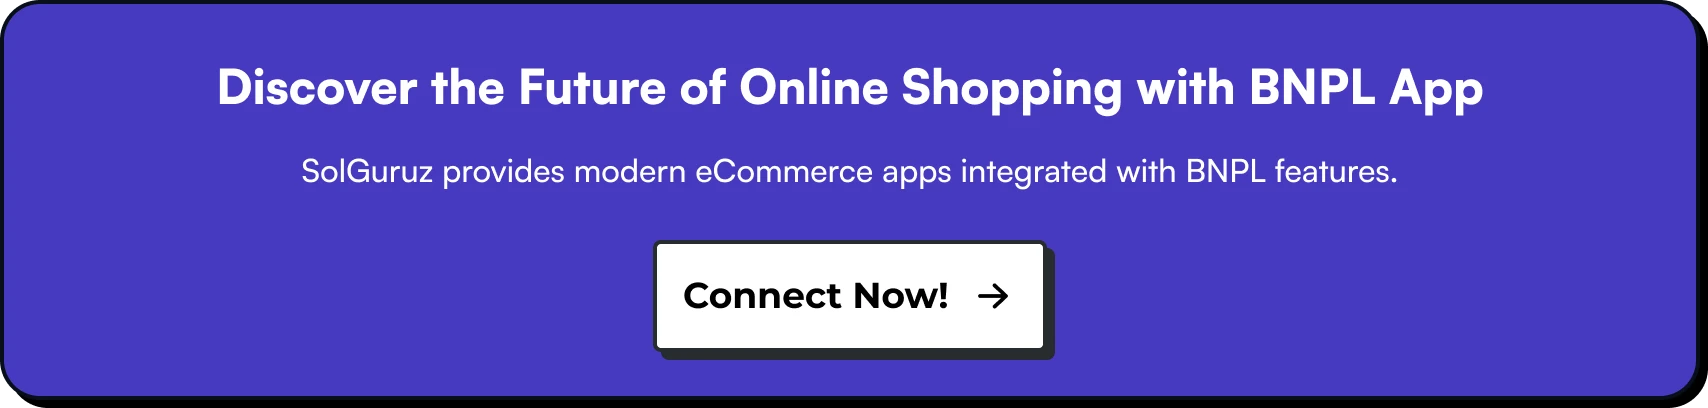 Discover the Future of Online Shopping with BNPL App